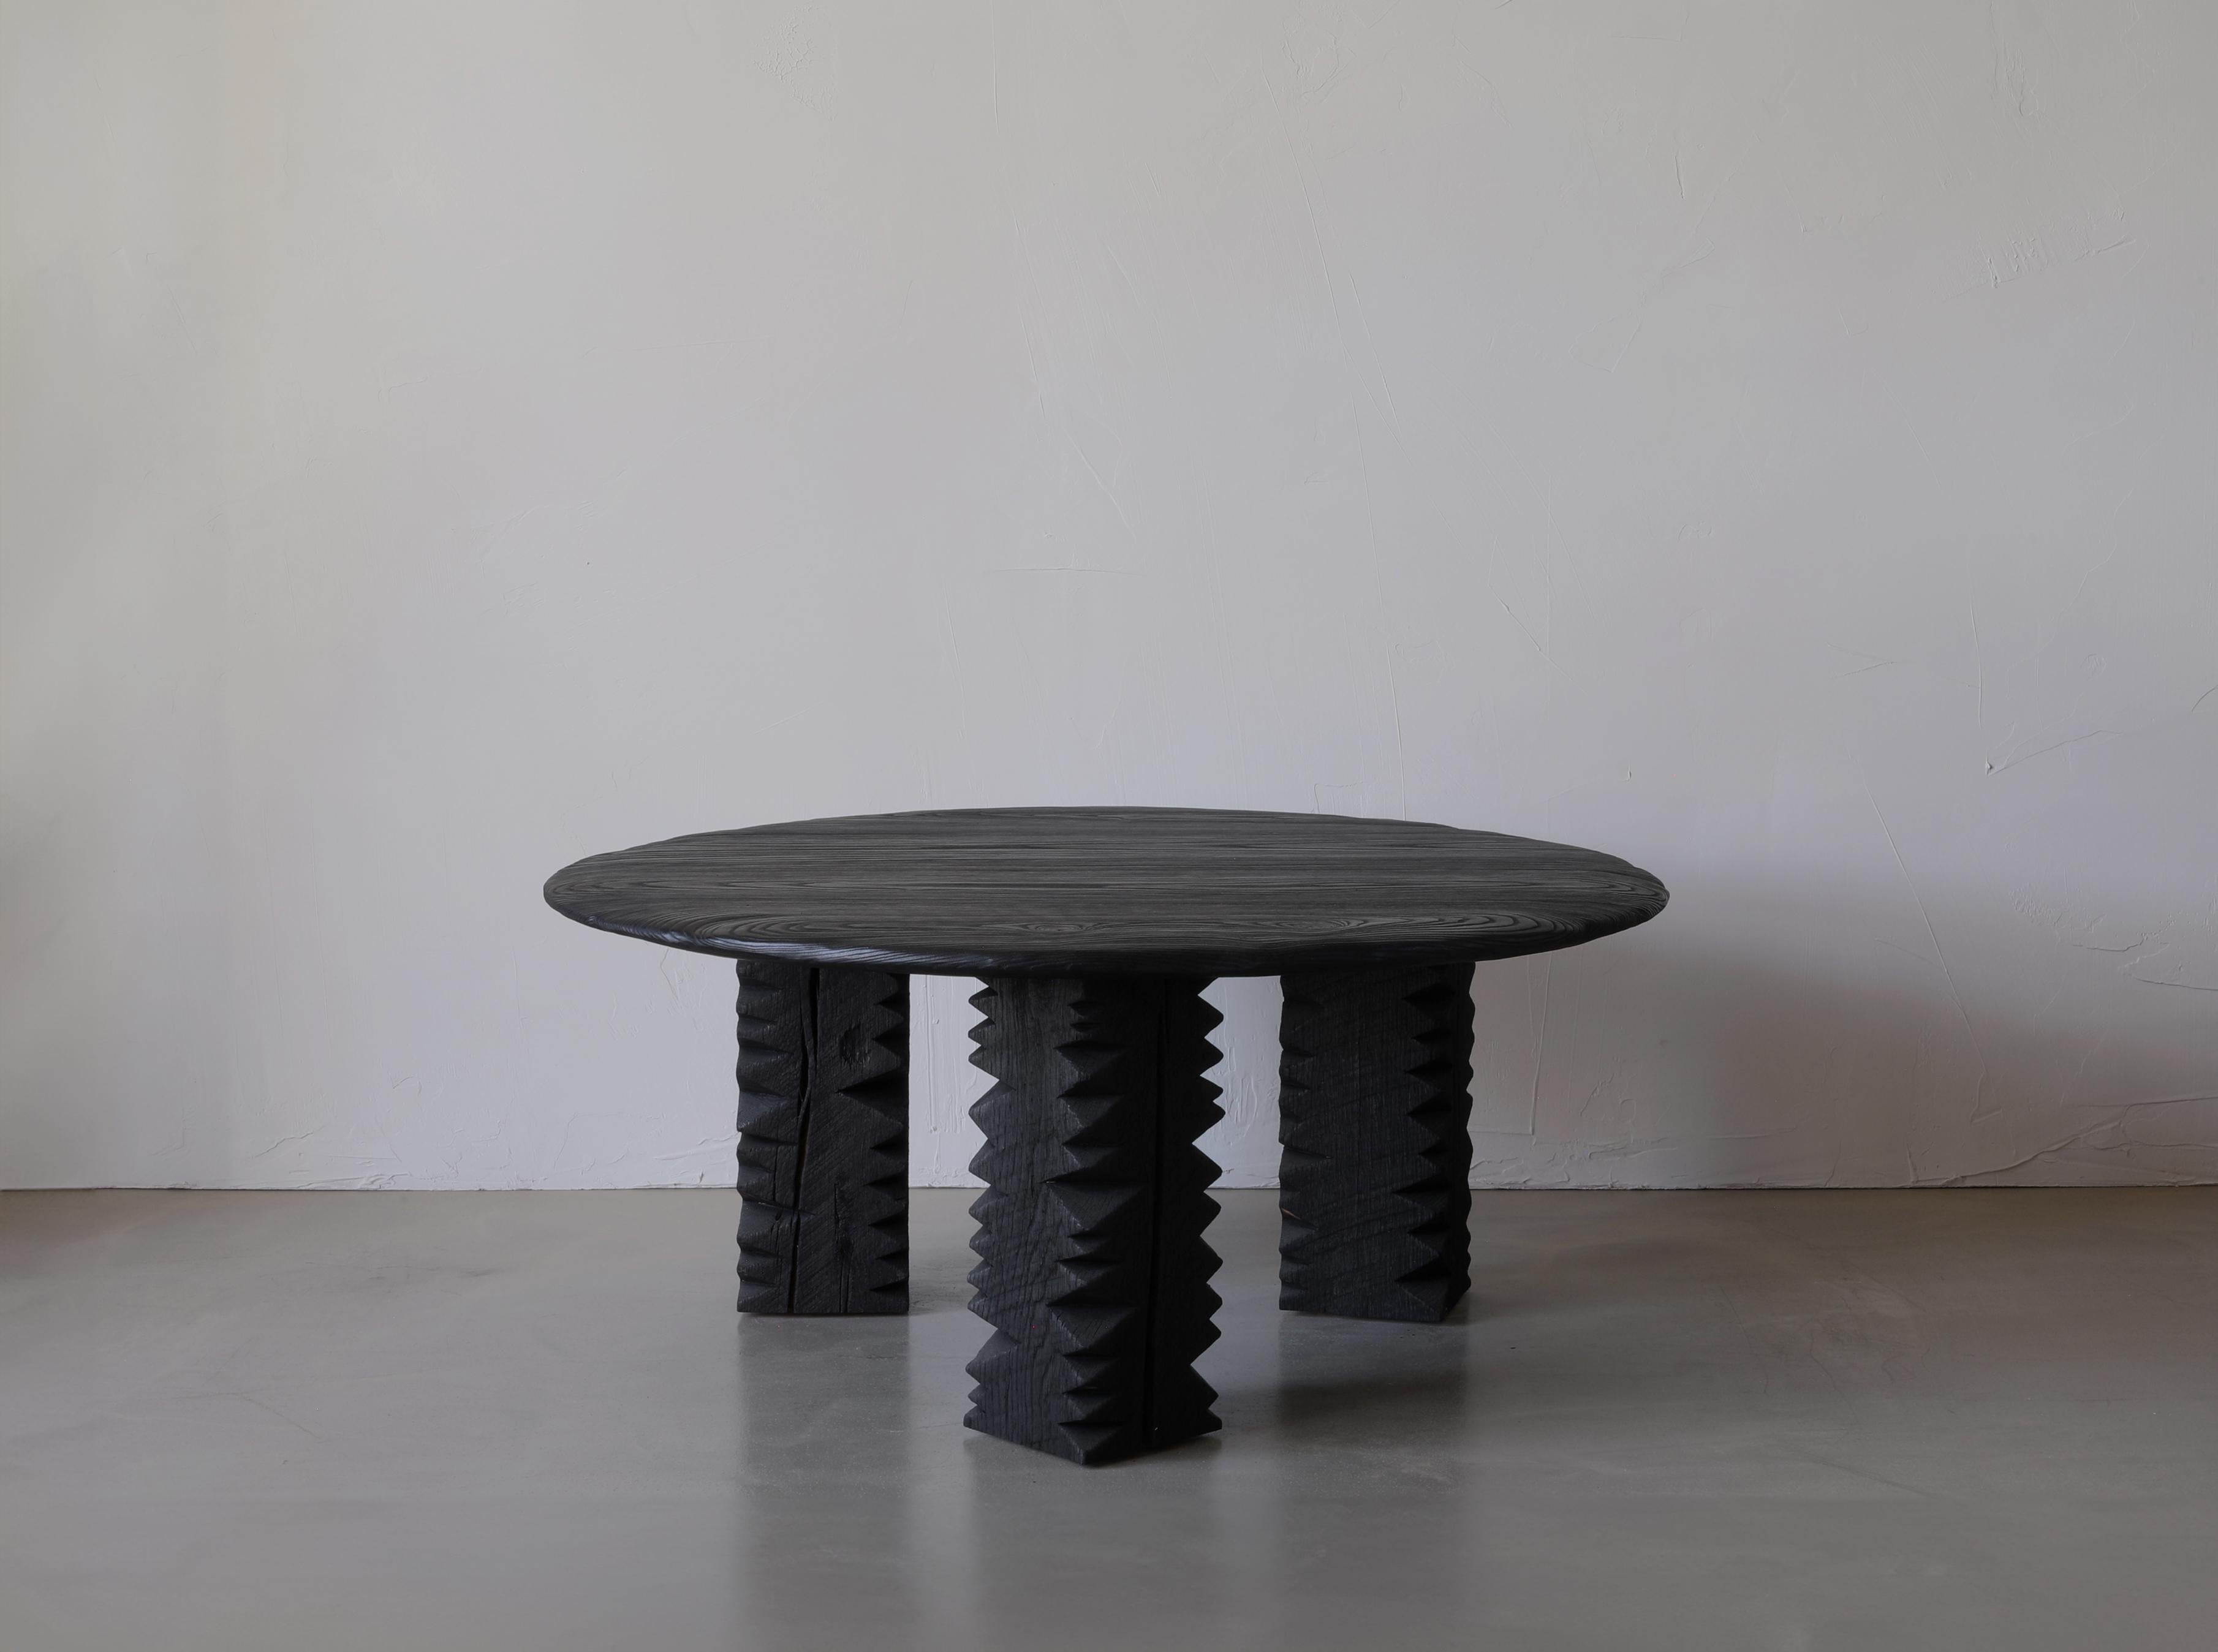 Notch III is a coffee table made up of three solid pedestal legs and a large charred and brushed top.

This collection finds its foundation in ‘cribbage’,  a rough-cut lumber used to build support structures called ‘cribs’ in coal mines. This